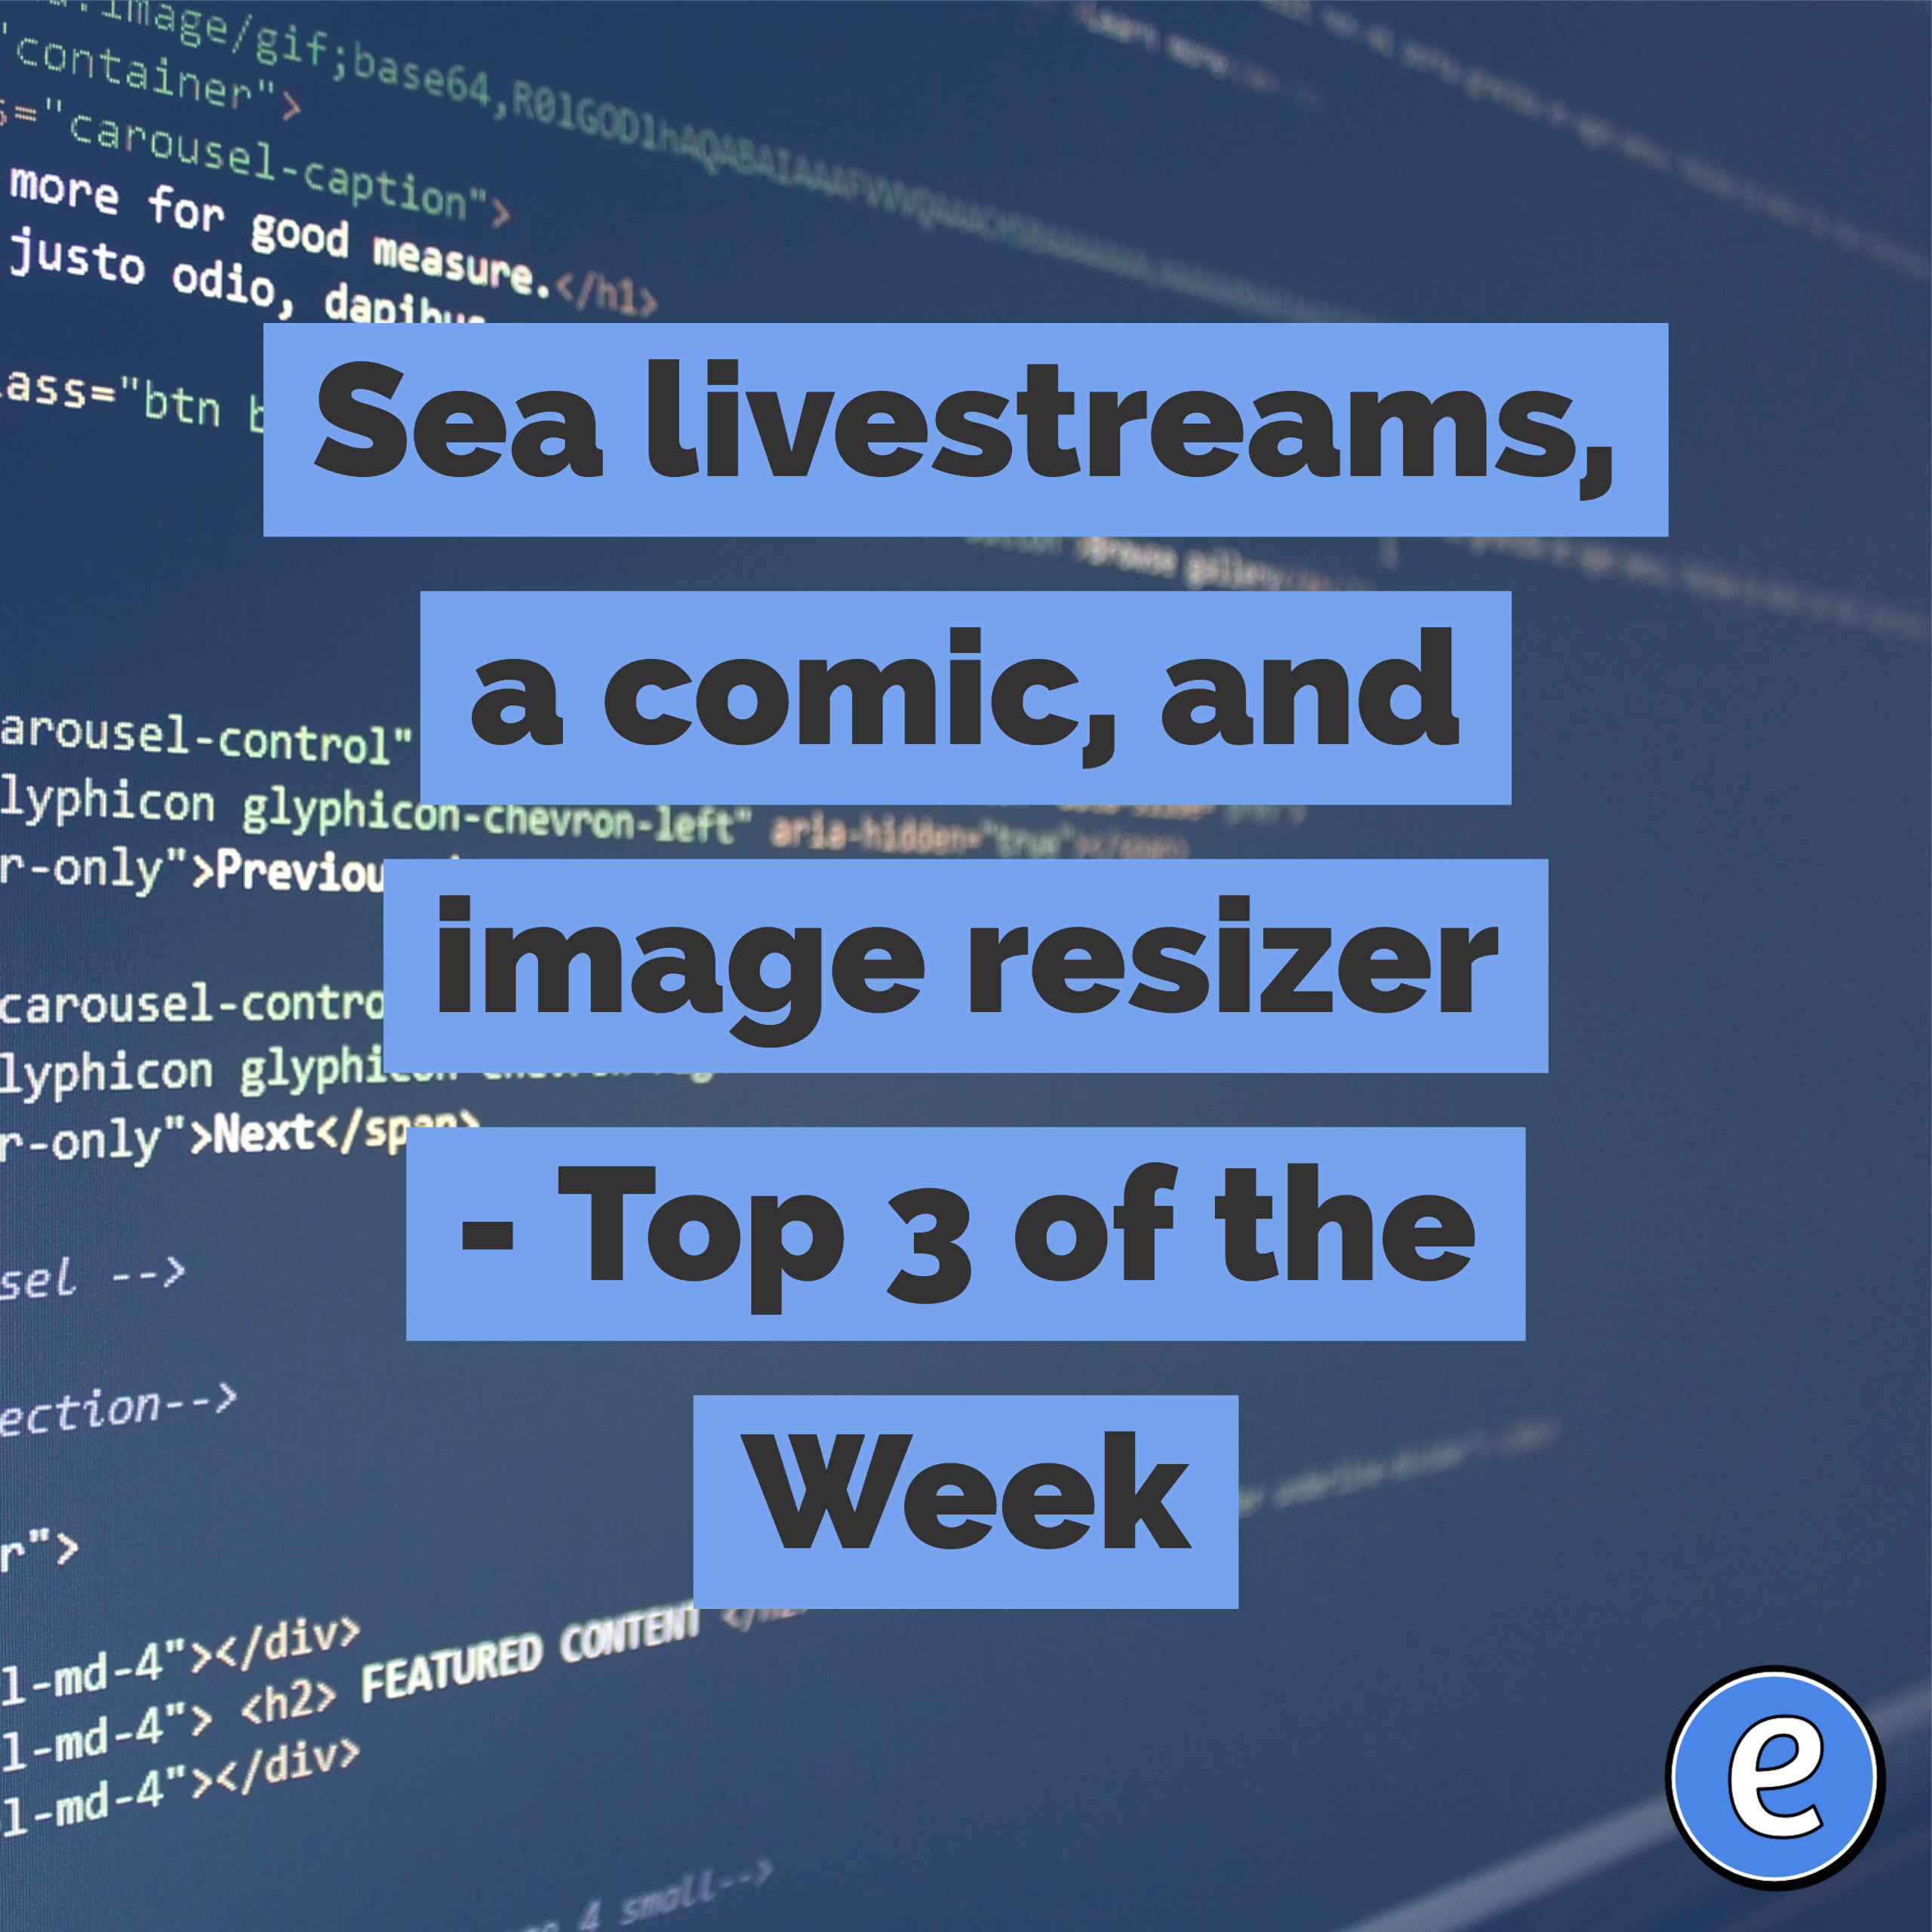 Sea livestreams, a comic, and image resizer – Top 3 of the Week